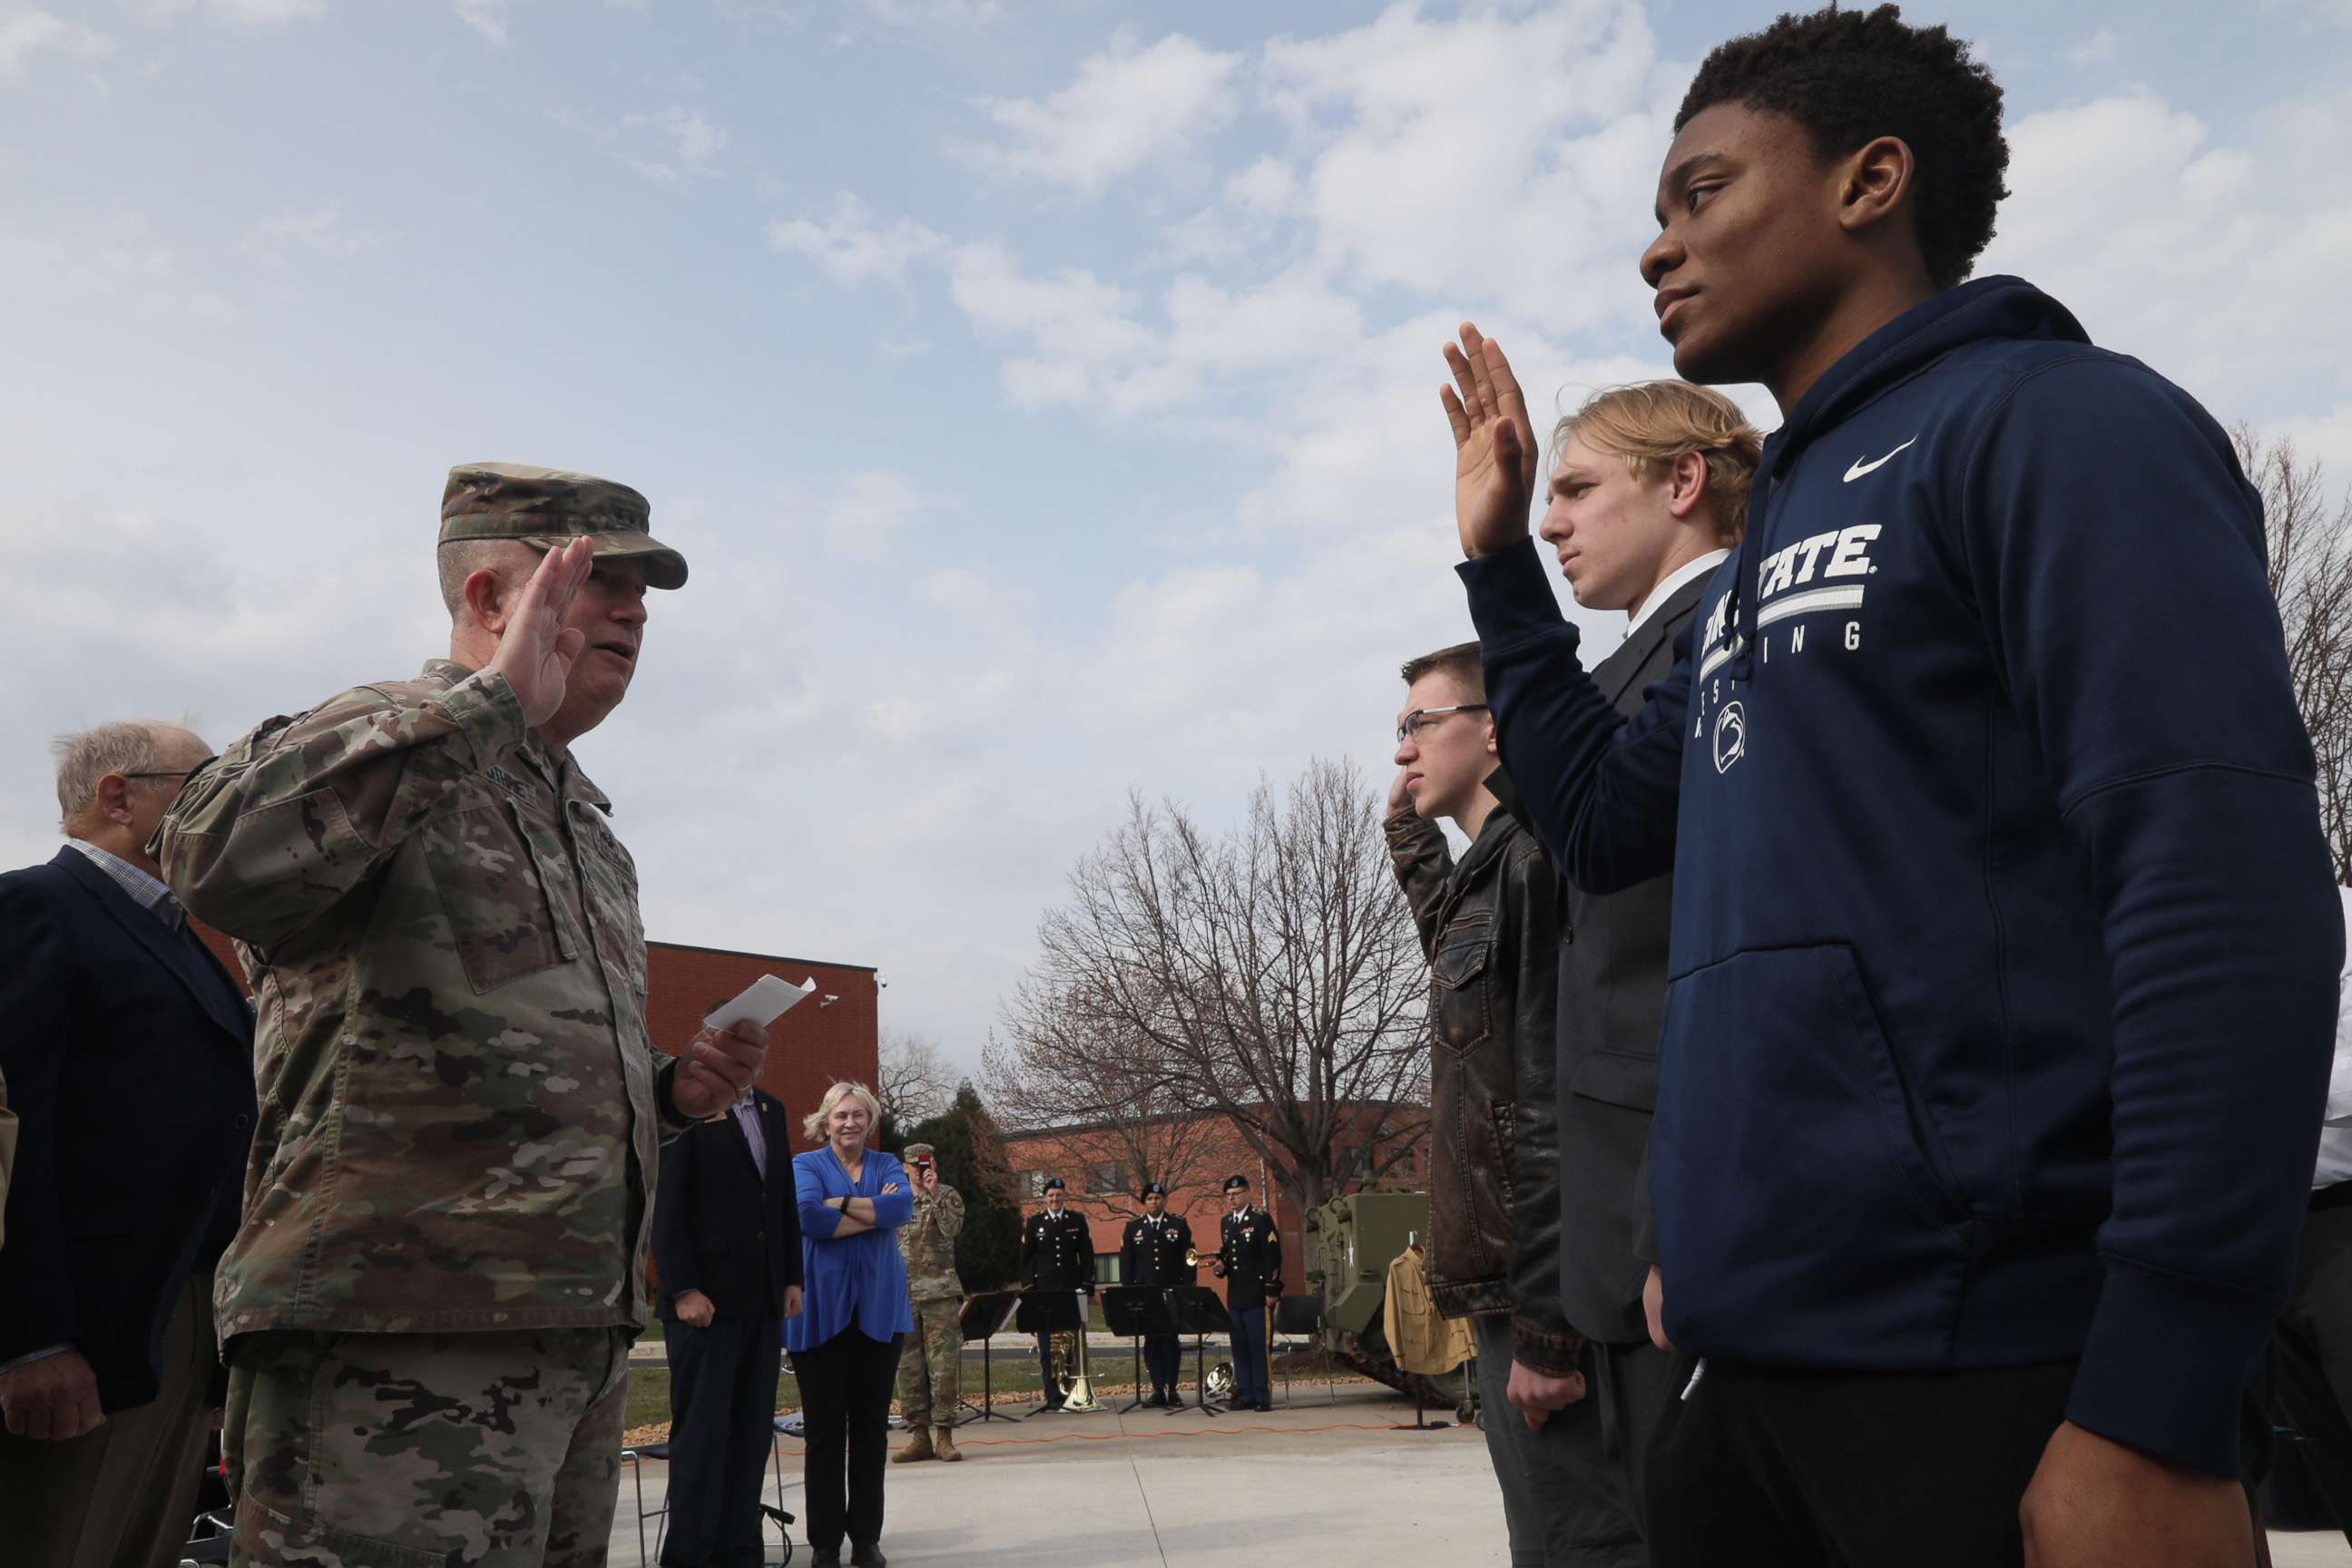 PHOTO: U.S. Army Reserve Maj. Gen. Darrell J. Guthrie administers the oath of enlistment to Future Soldiers, Ethan Ethan Fisher, center, Darrin Kuyper and Kenneth Stahl at Fort Snelling, Minn., April 29, 2022.